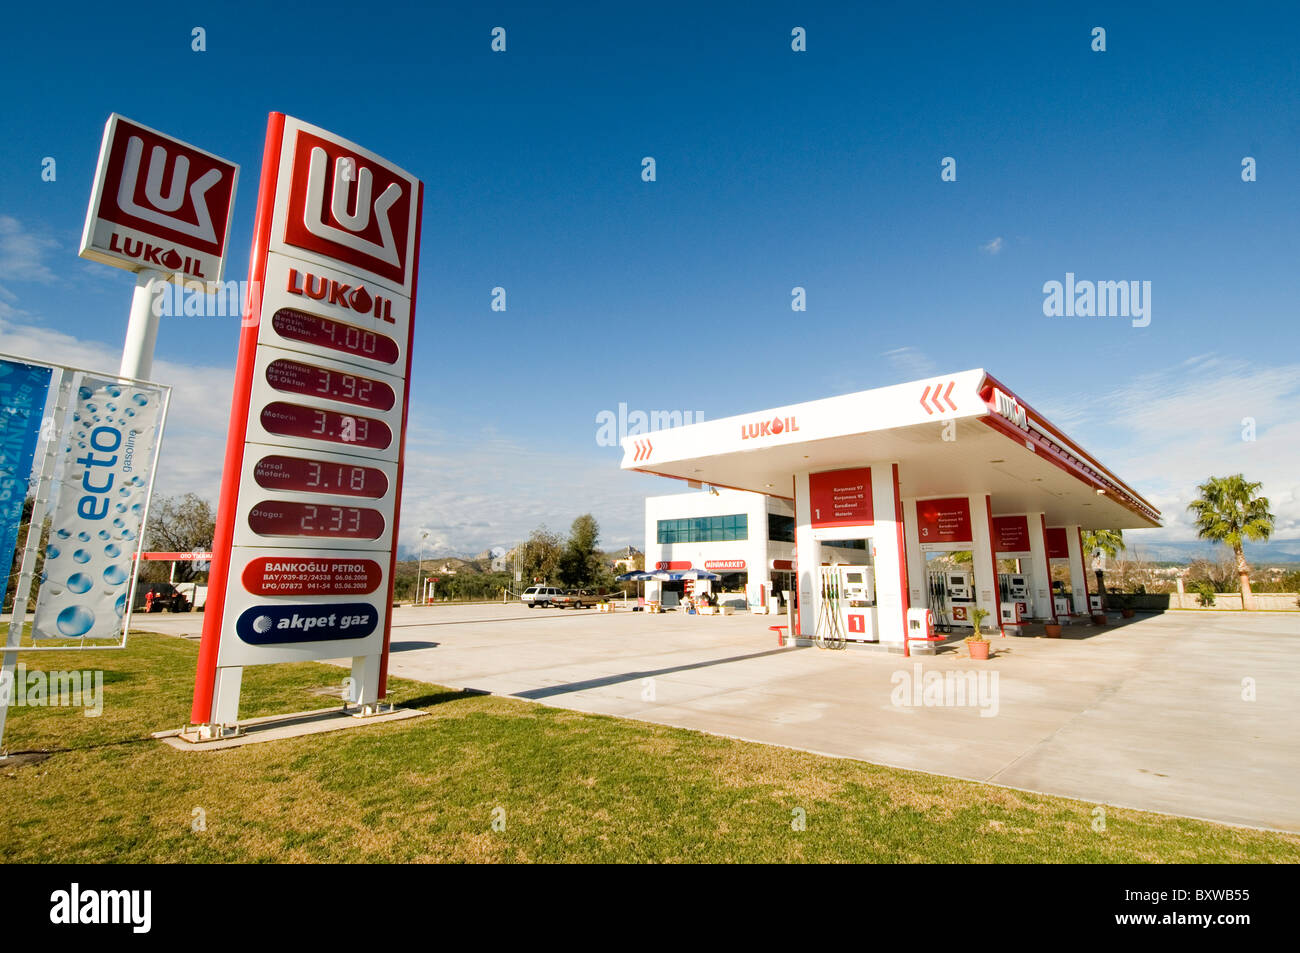 lukoil luk oil petrol station stations fuel petrochemical russian company soviet russia Stock Photo